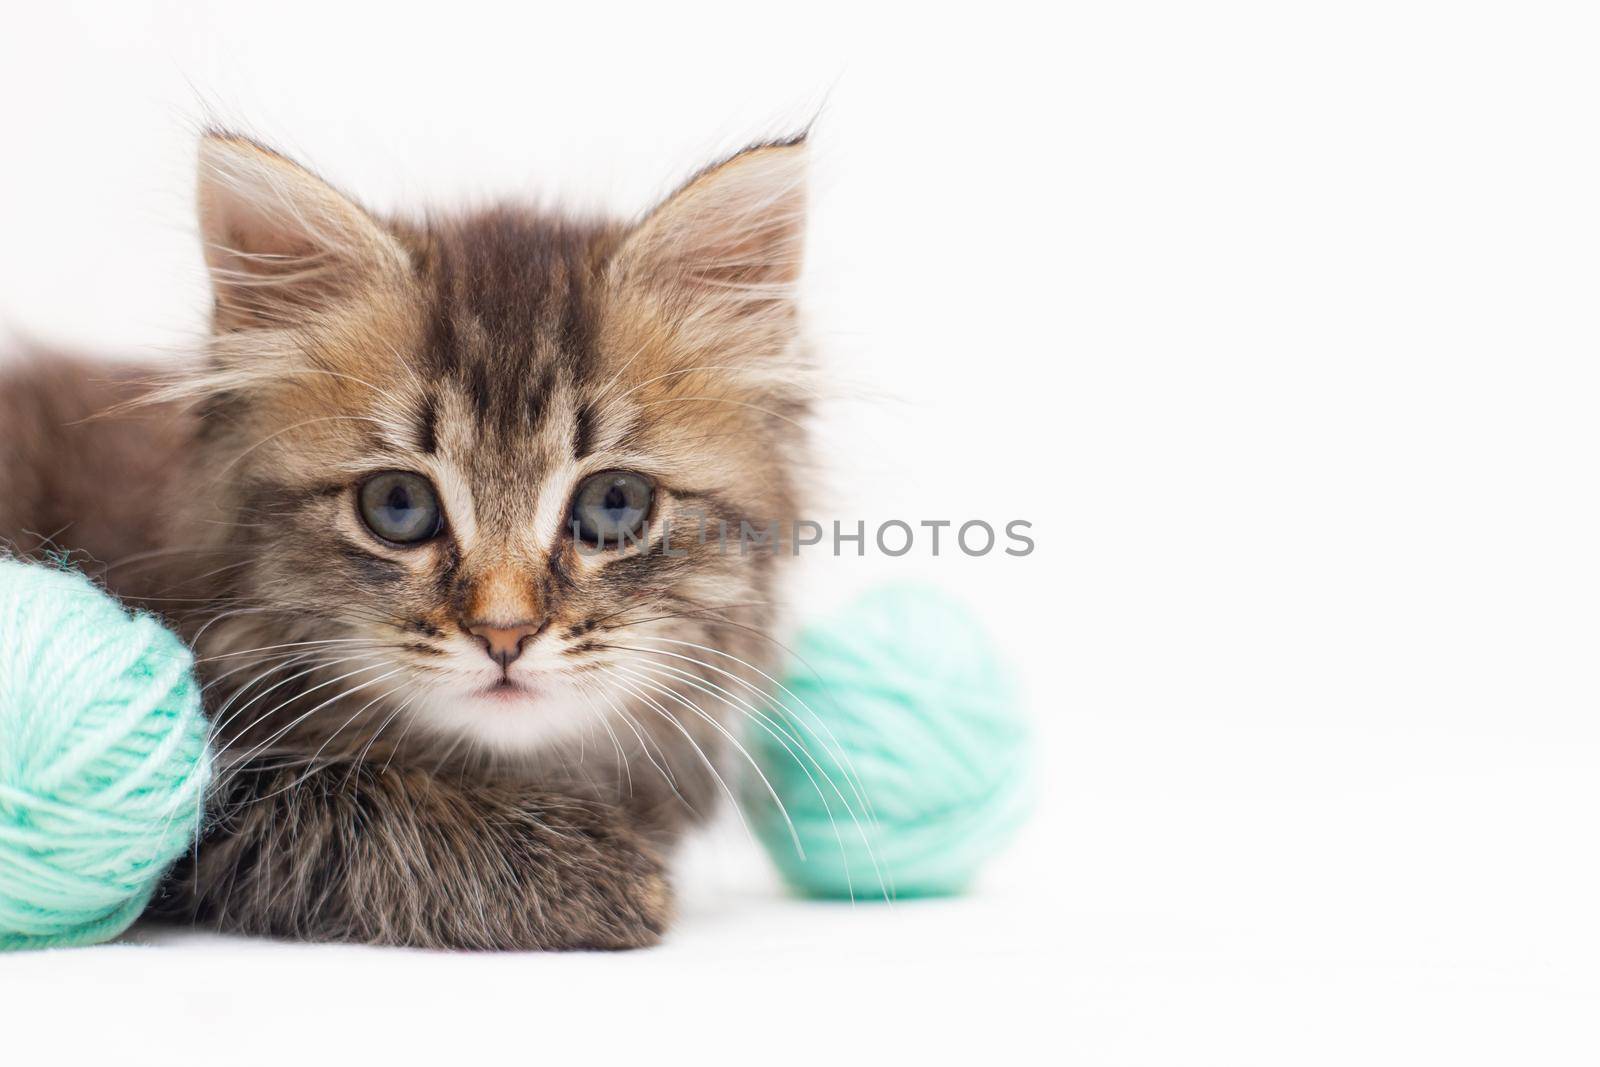 Striped cat with blue balls, skeins of thread on a white bed. An article about kittens. An article about pets. A curious little kitten looking into the camera by alenka2194